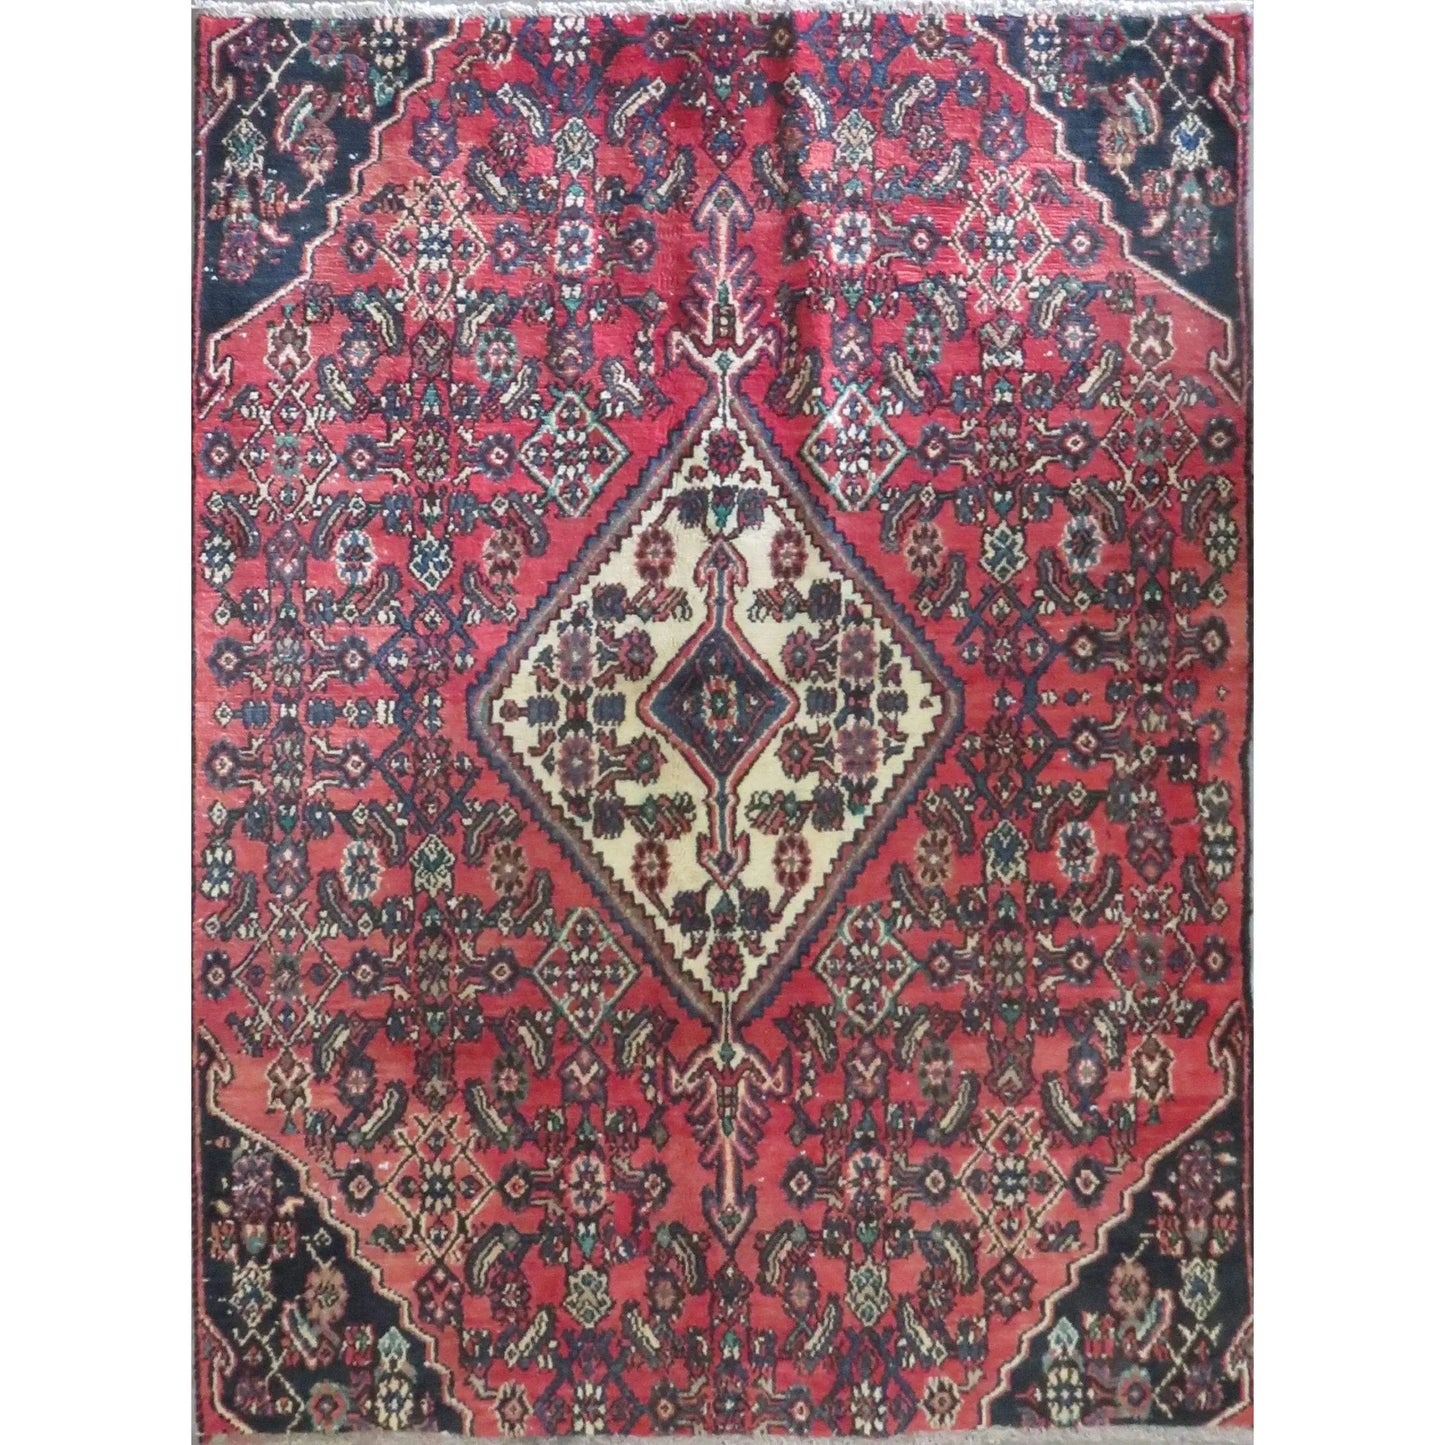 Hand-Knotted Persian Wool Rug _ Luxurious Vintage Design, 5'8" x 4'3", Artisan Crafted